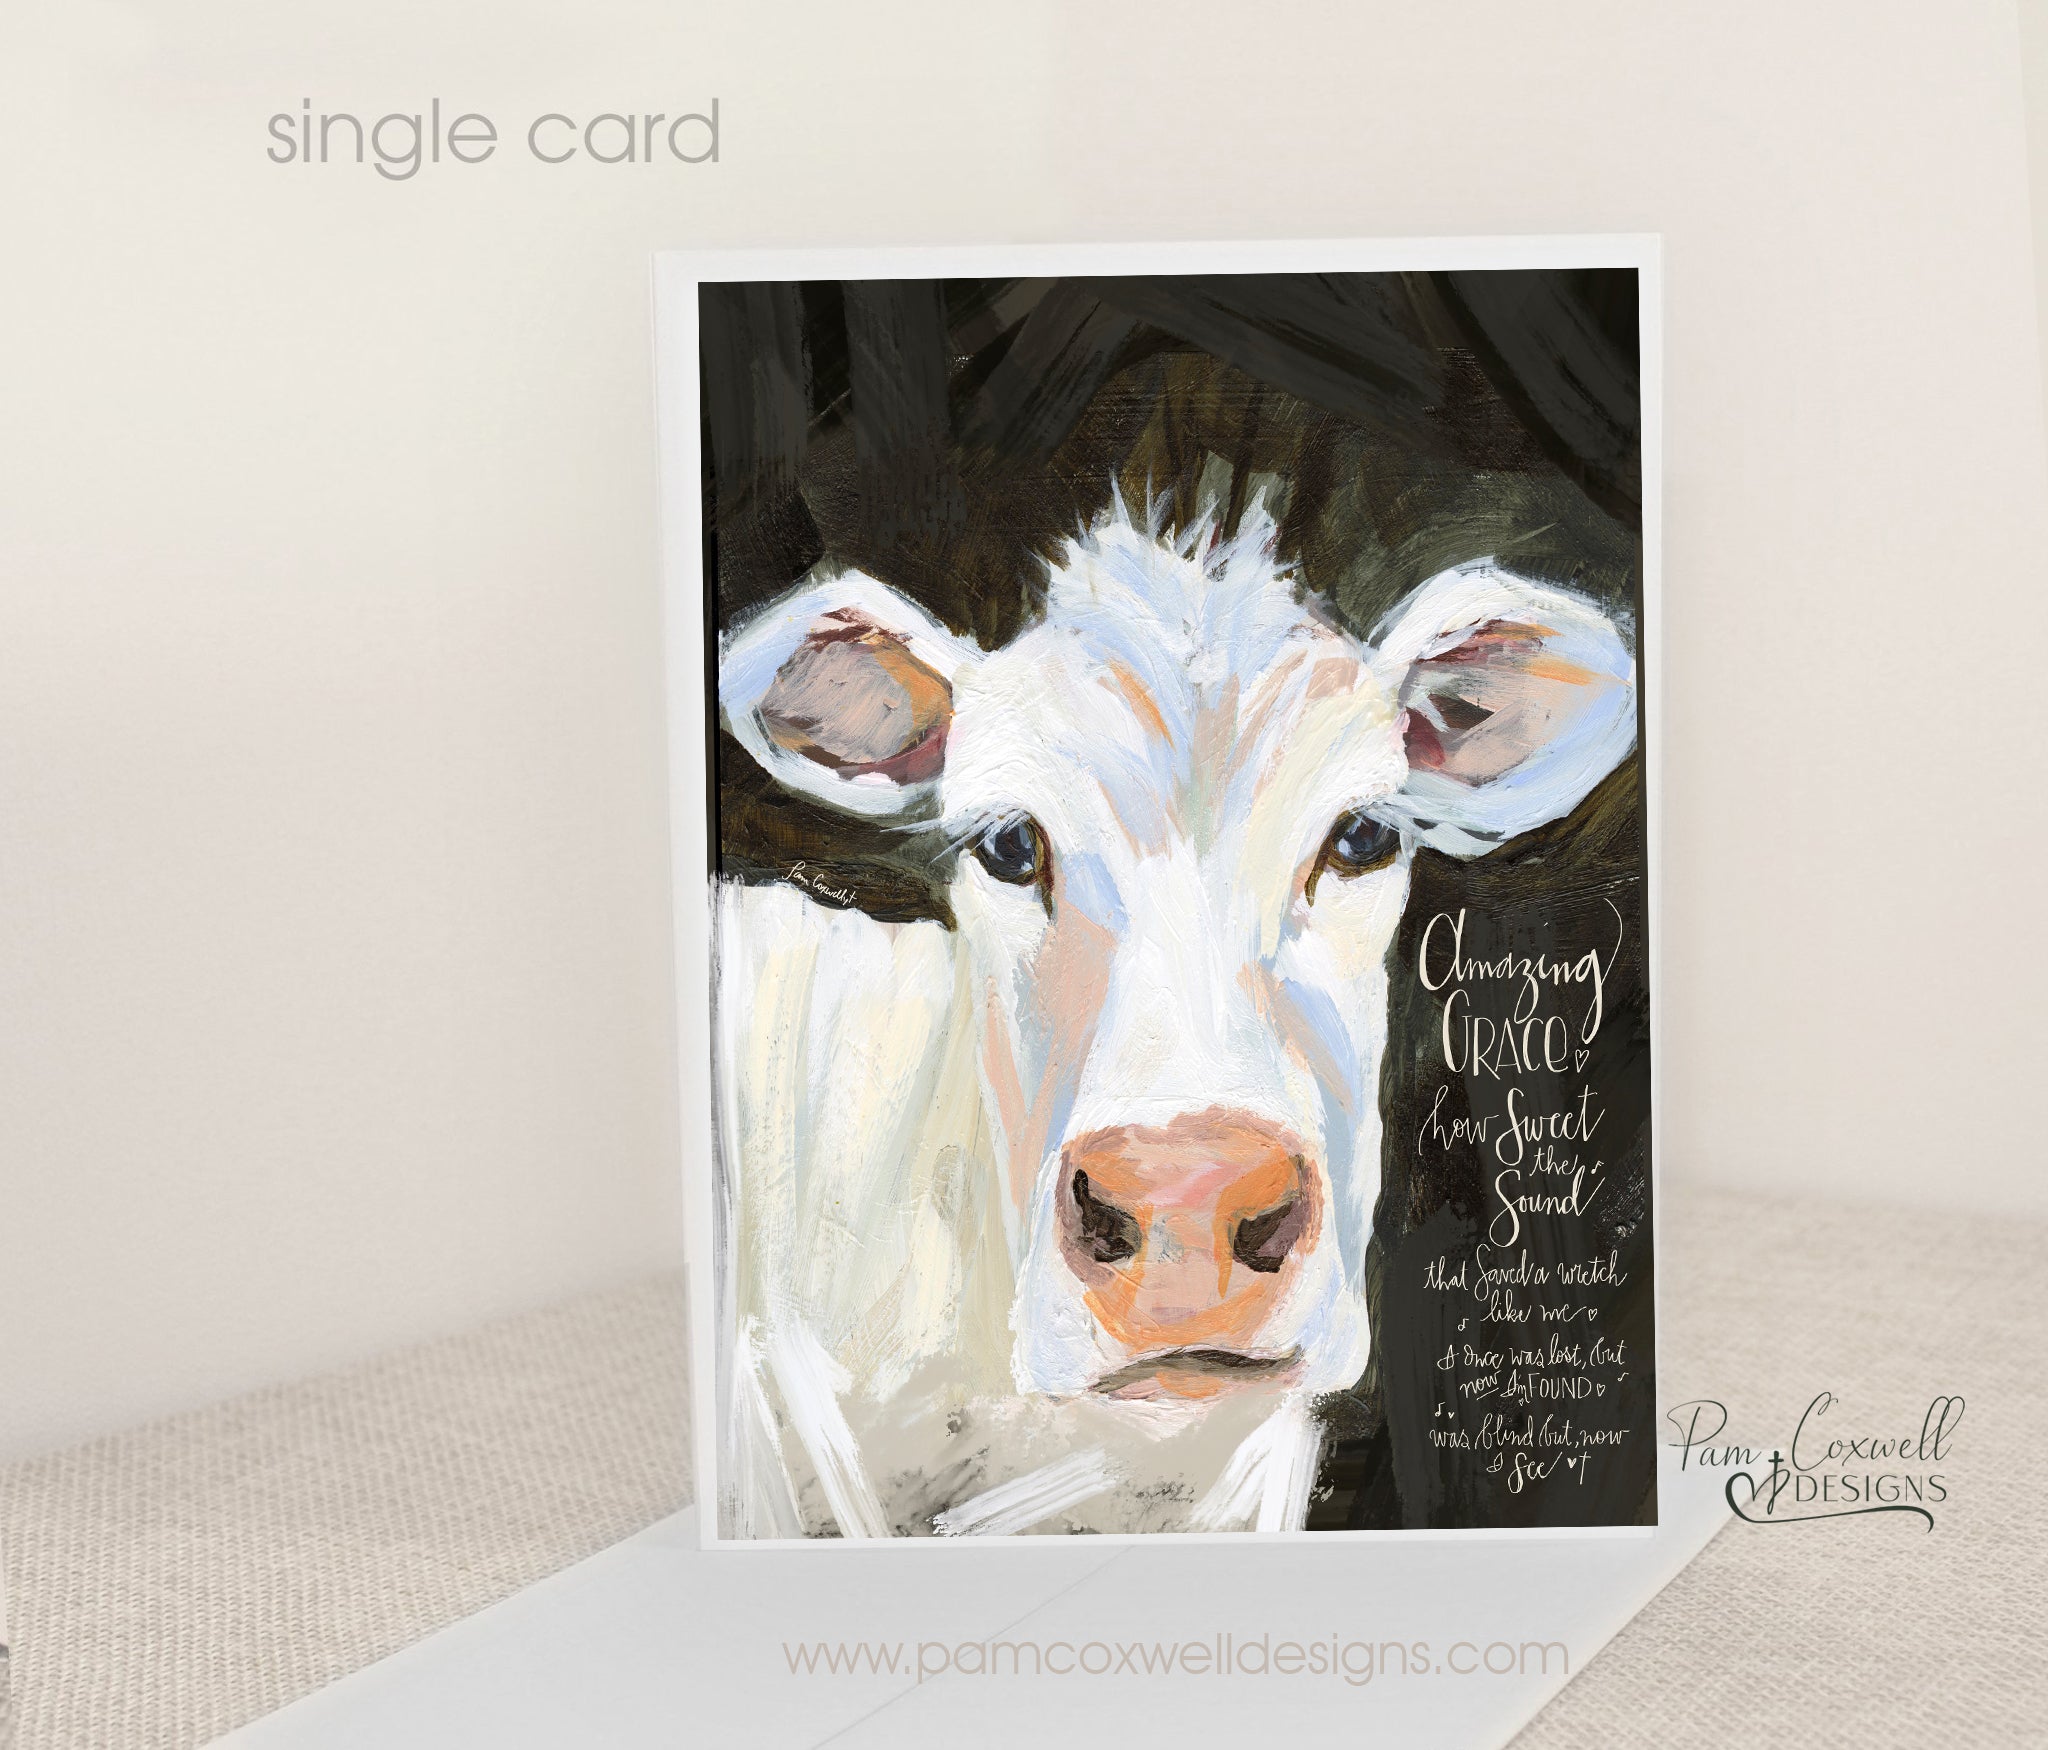 Amazing Grace Cow - Notecards